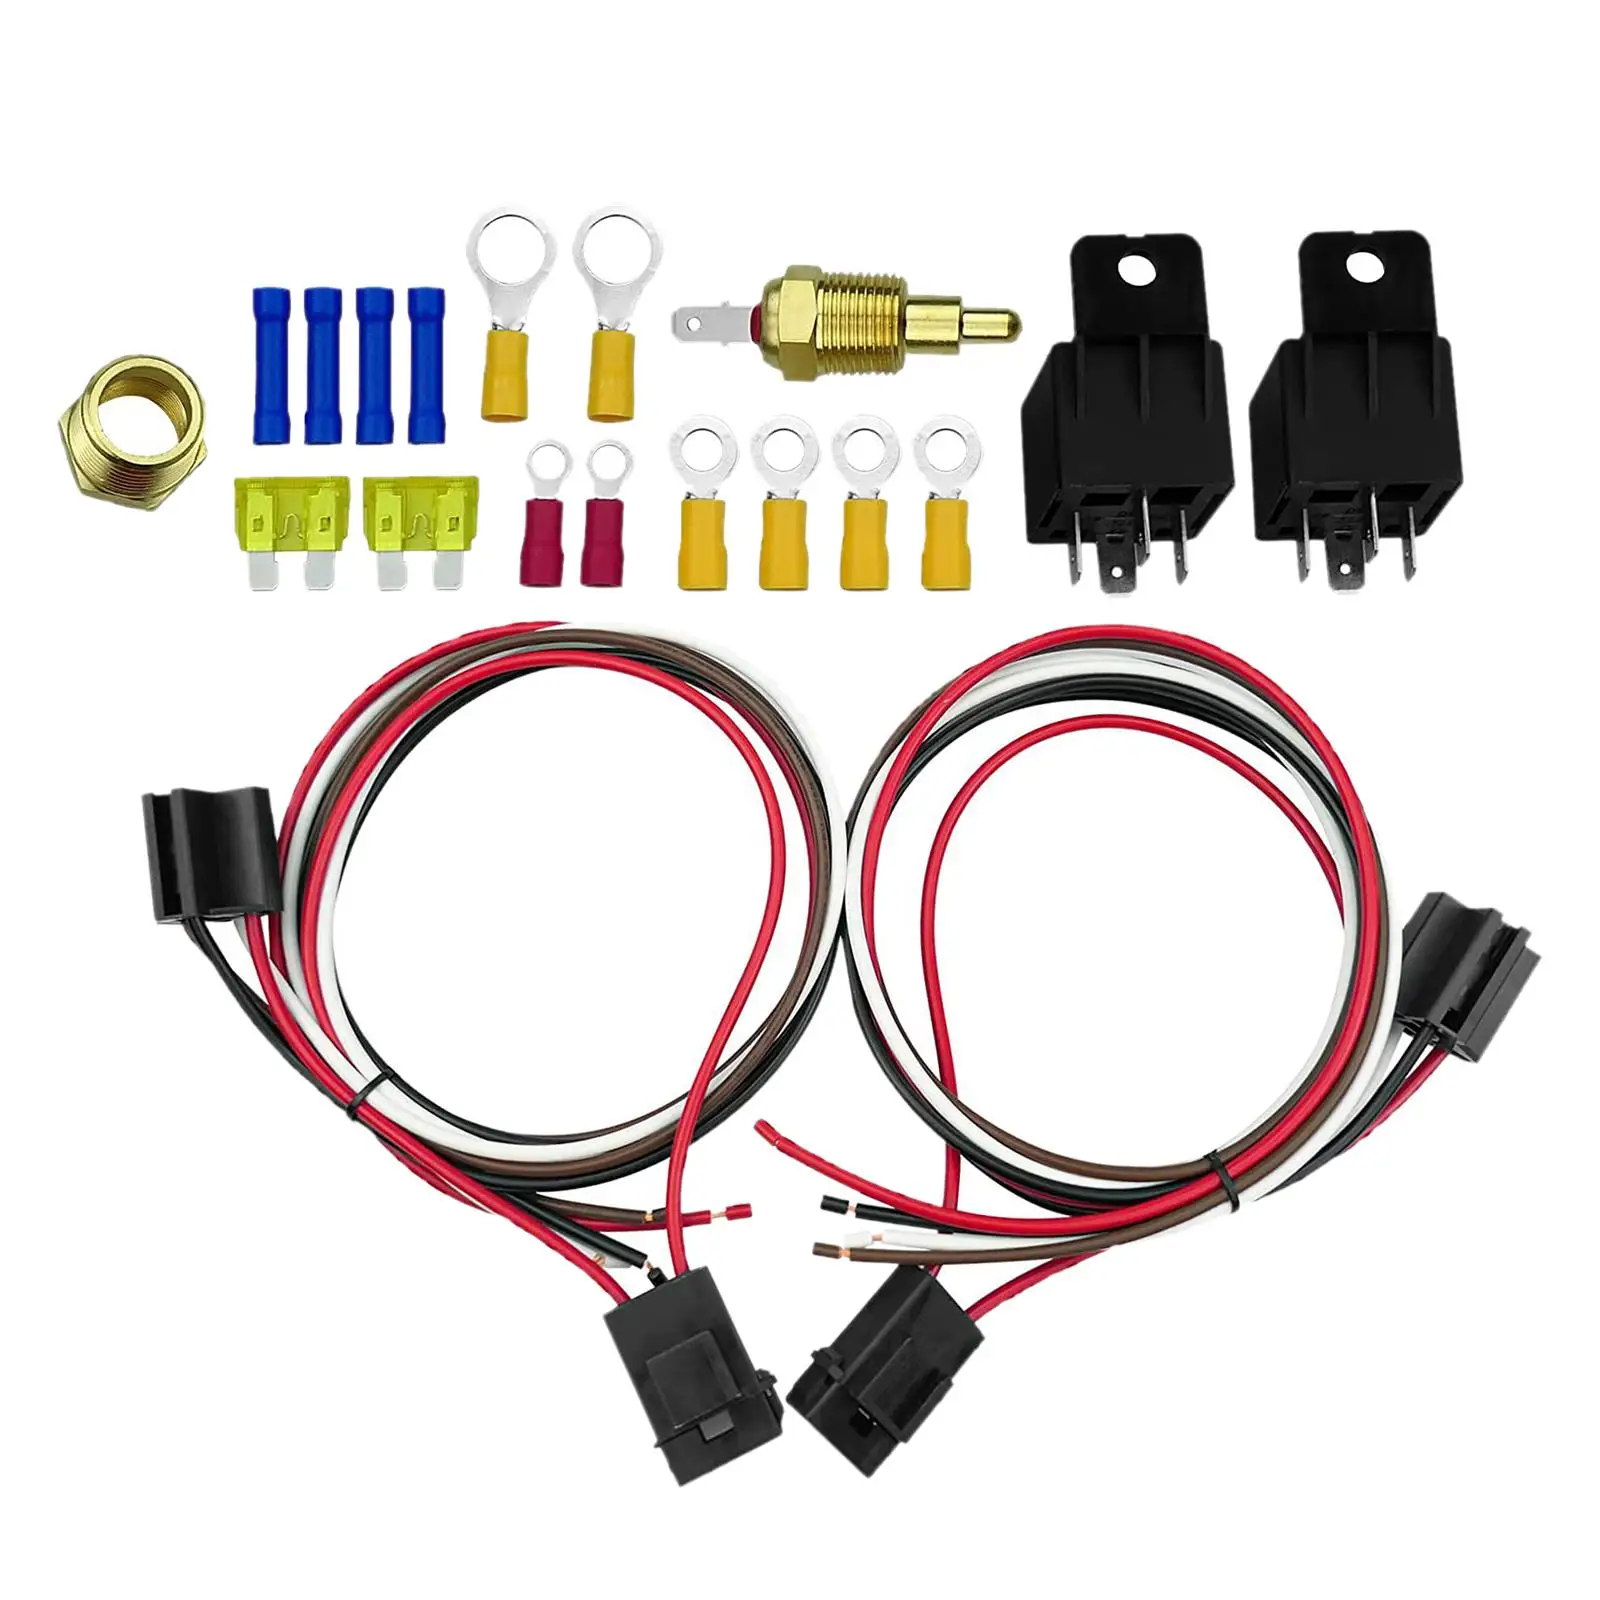 Auto Dual Electric Cooling Harness Kit 185 On 175 Off 40 Amp